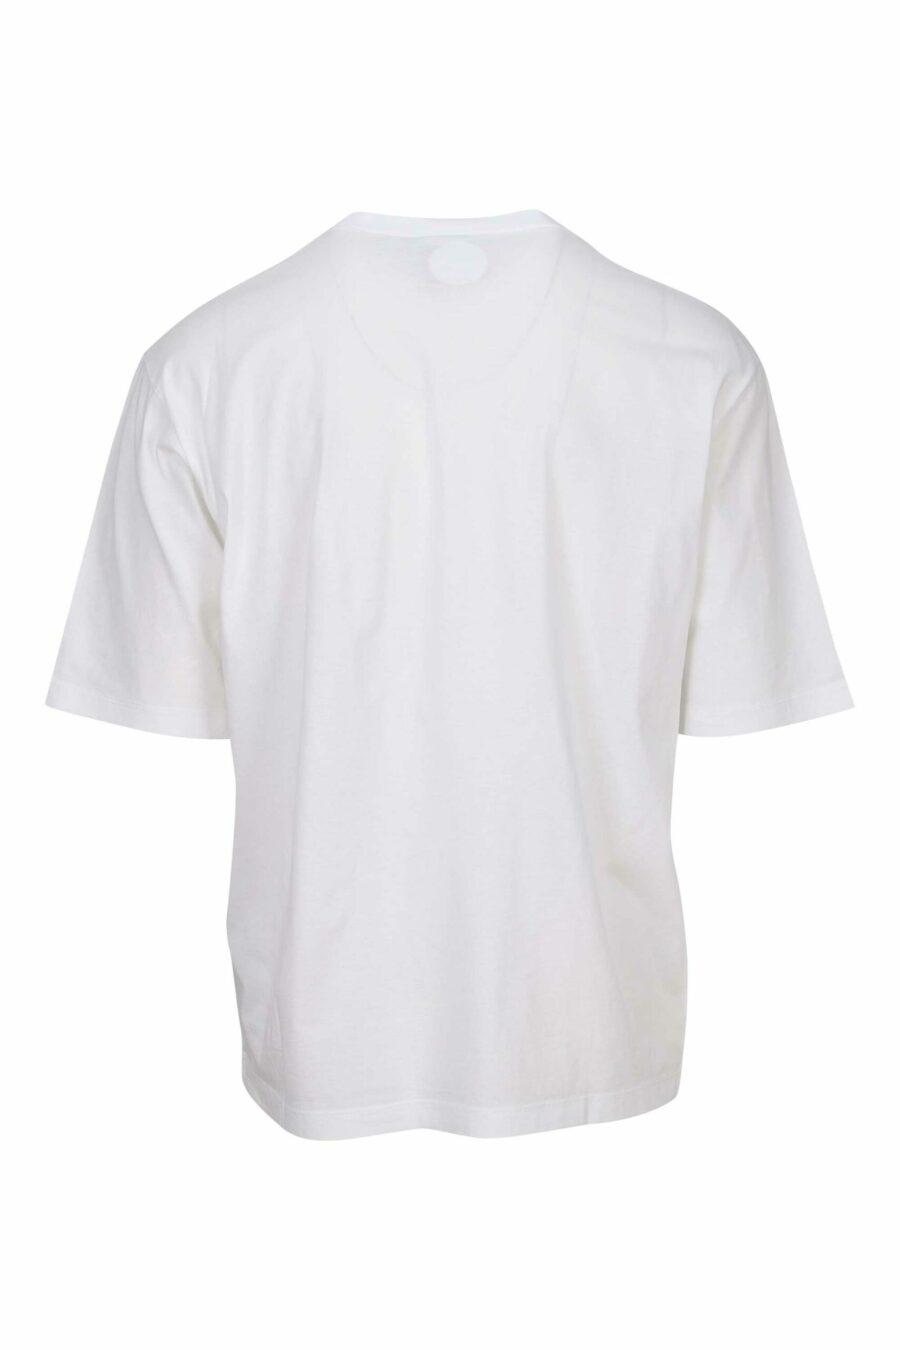 Oversize white T-shirt with credit card logo underneath - 8054148265540 1 scaled